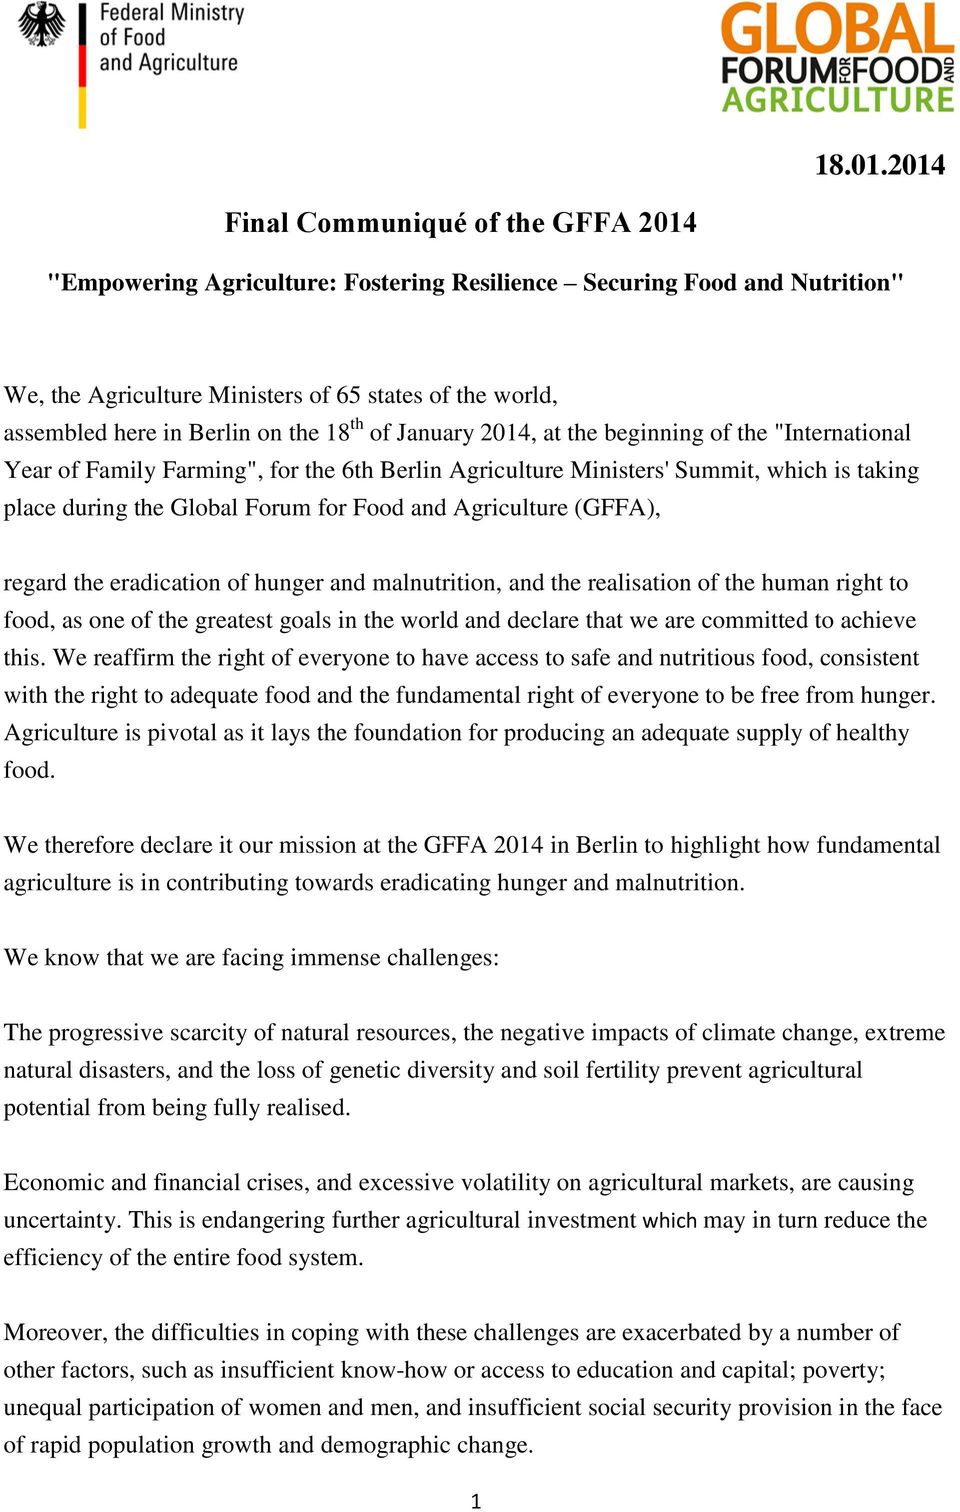 the 18 th of January 2014, at the beginning of the "International Year of Family Farming", for the 6th Berlin Agriculture Ministers' Summit, which is taking place during the Global Forum for Food and